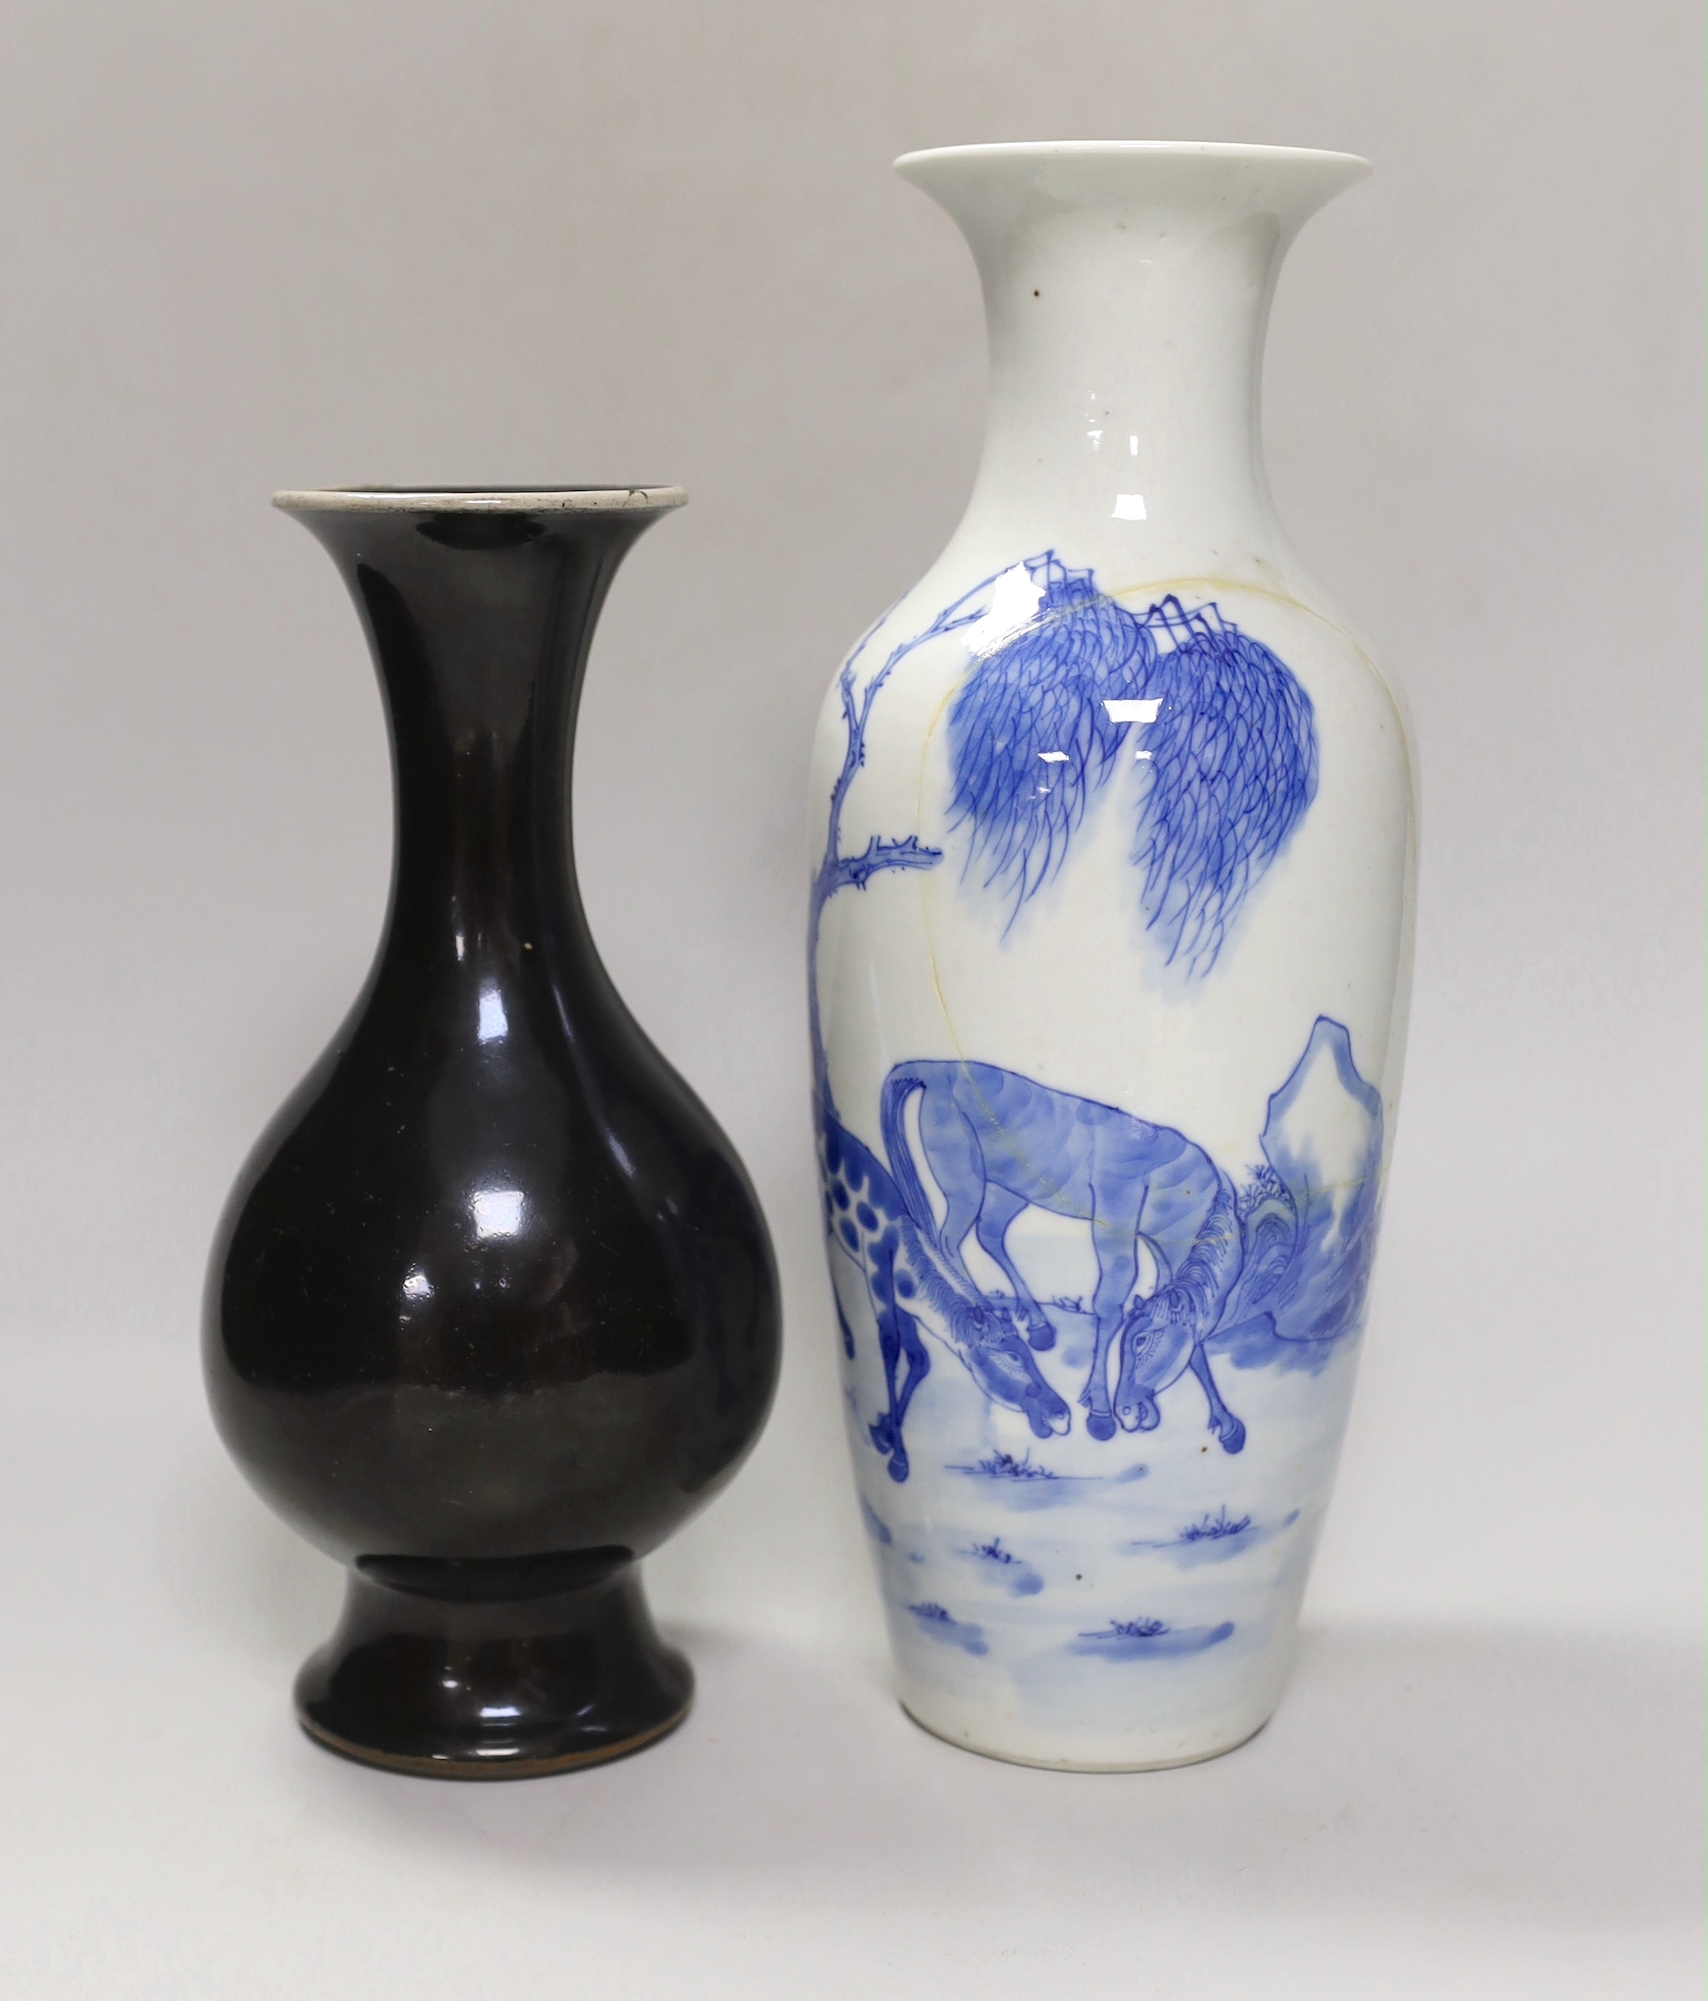 A Chinese mirror-black glazed vase, 18th century and a 19th century Chinese blue and white 'horses' vase, tallest 30cm                                                                                                      